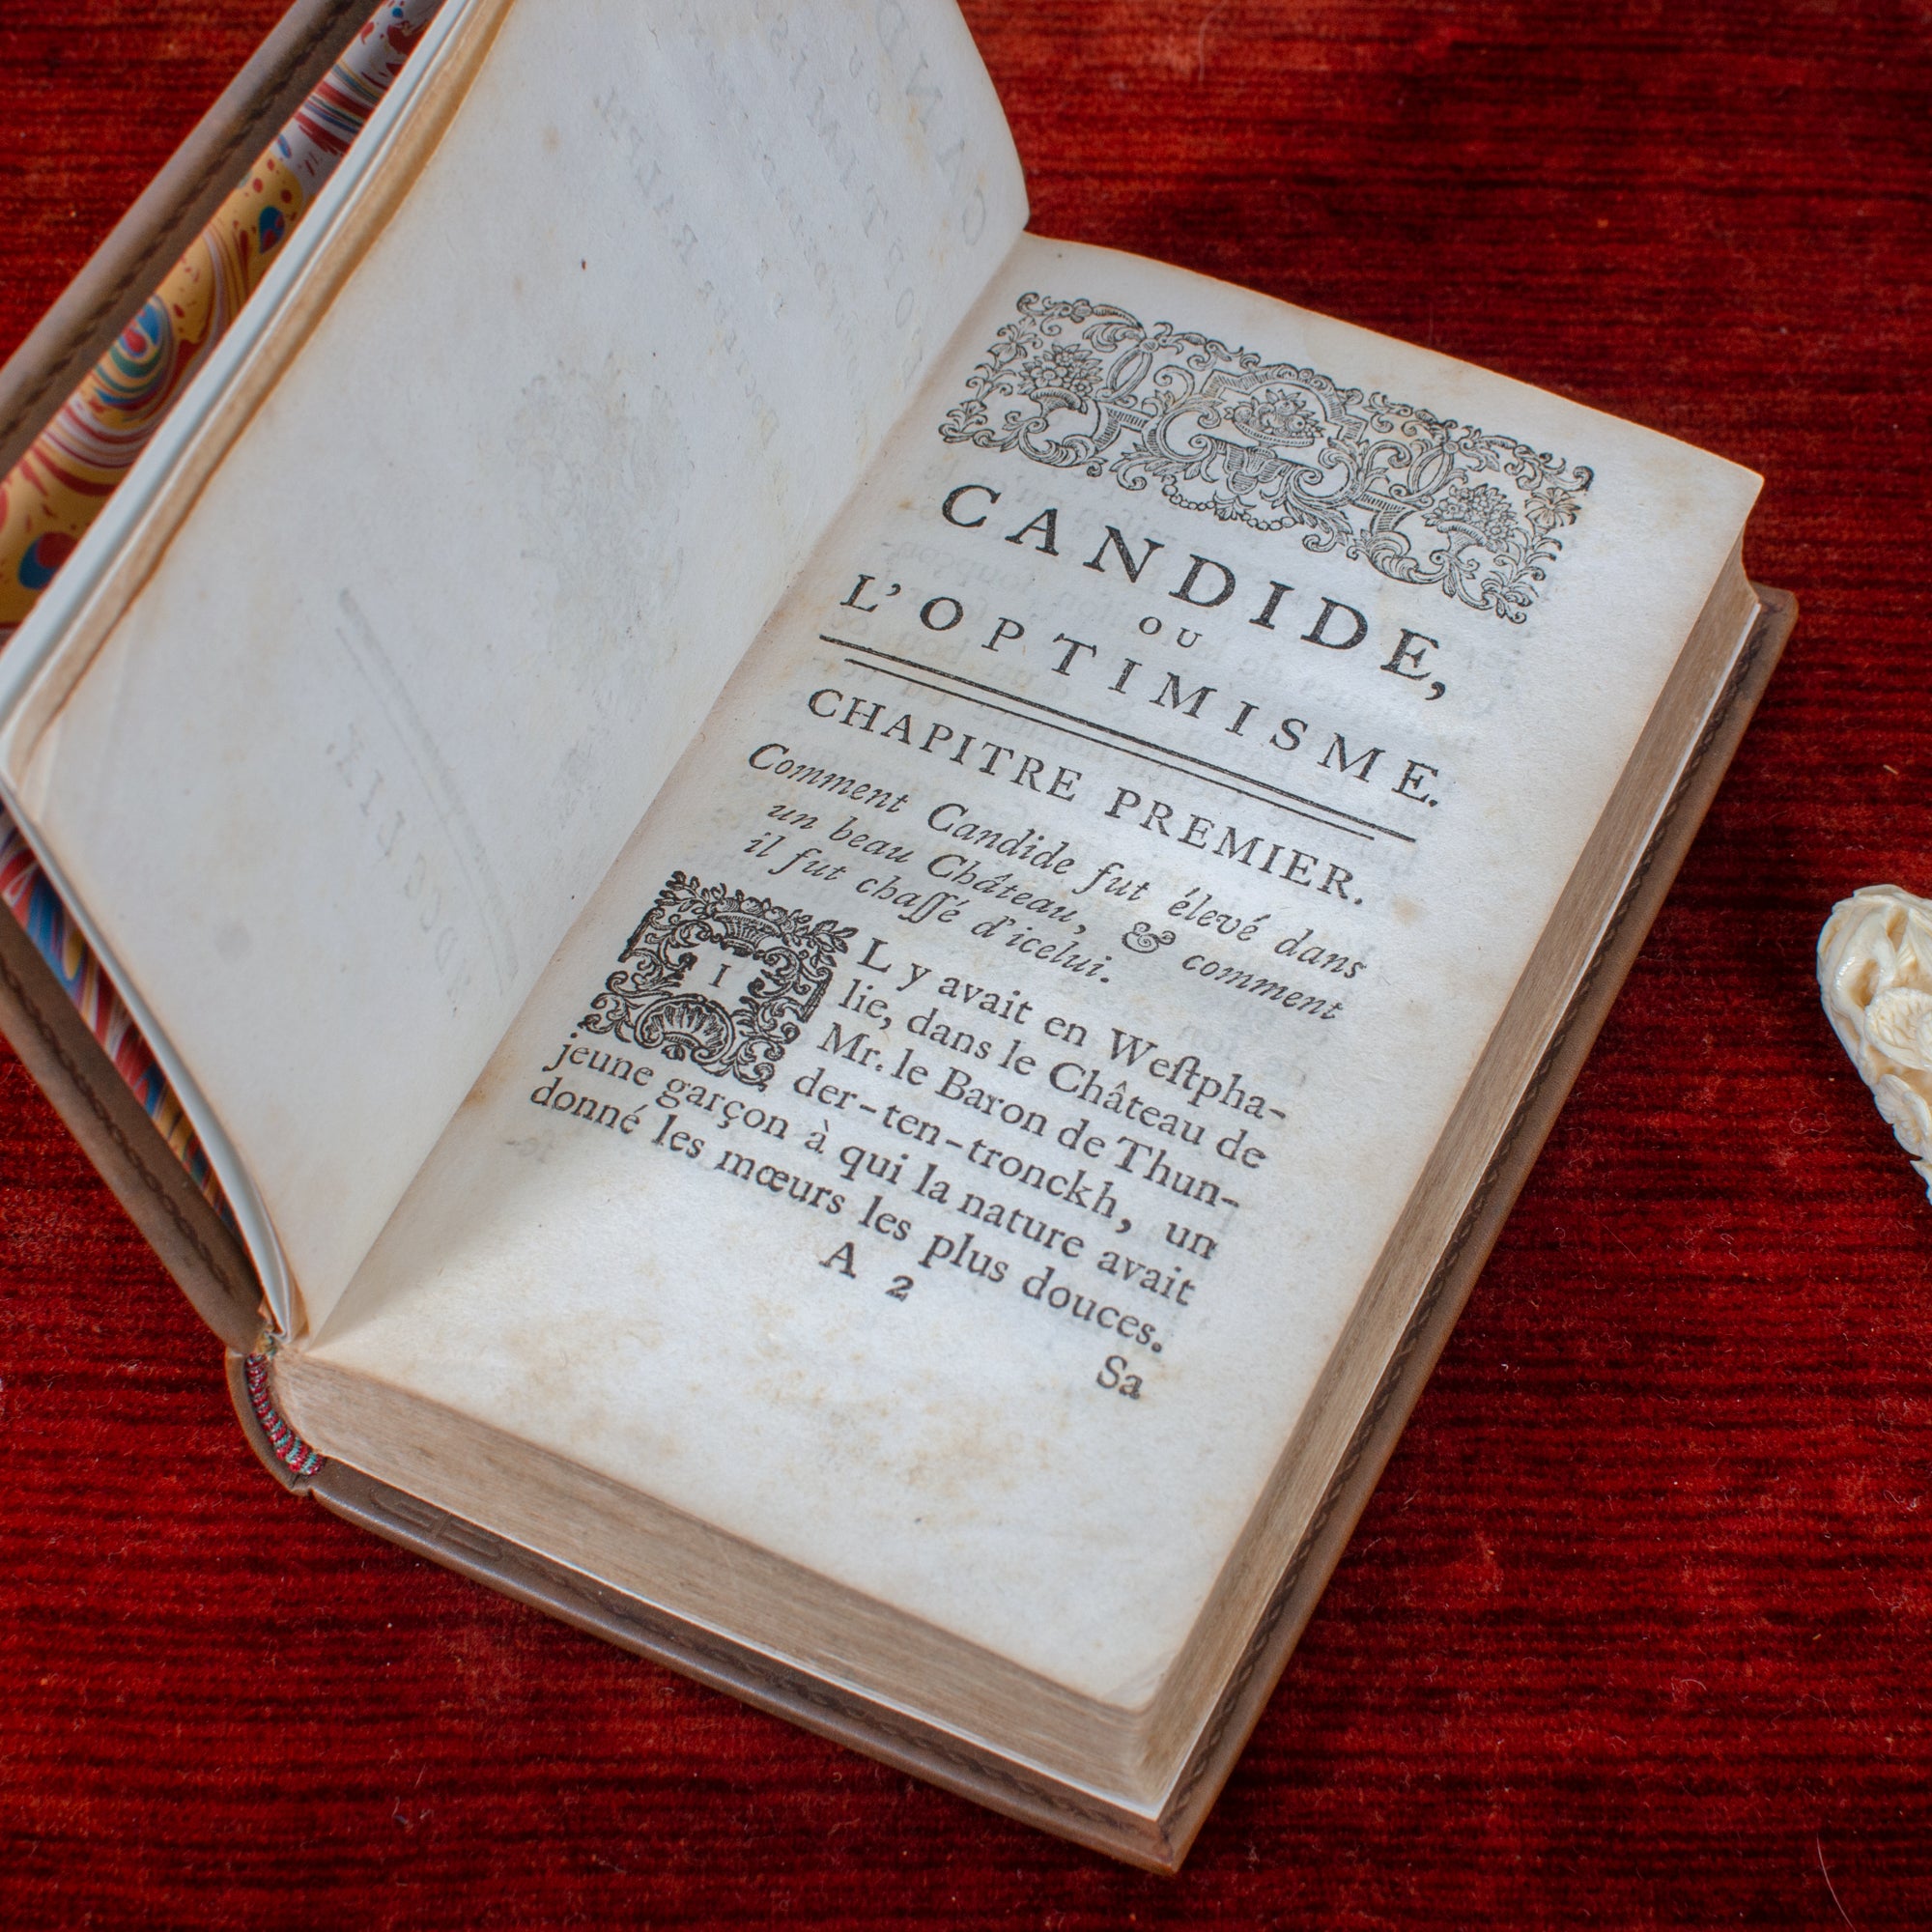 Voltaire's Candide True First Edition & First London Edition